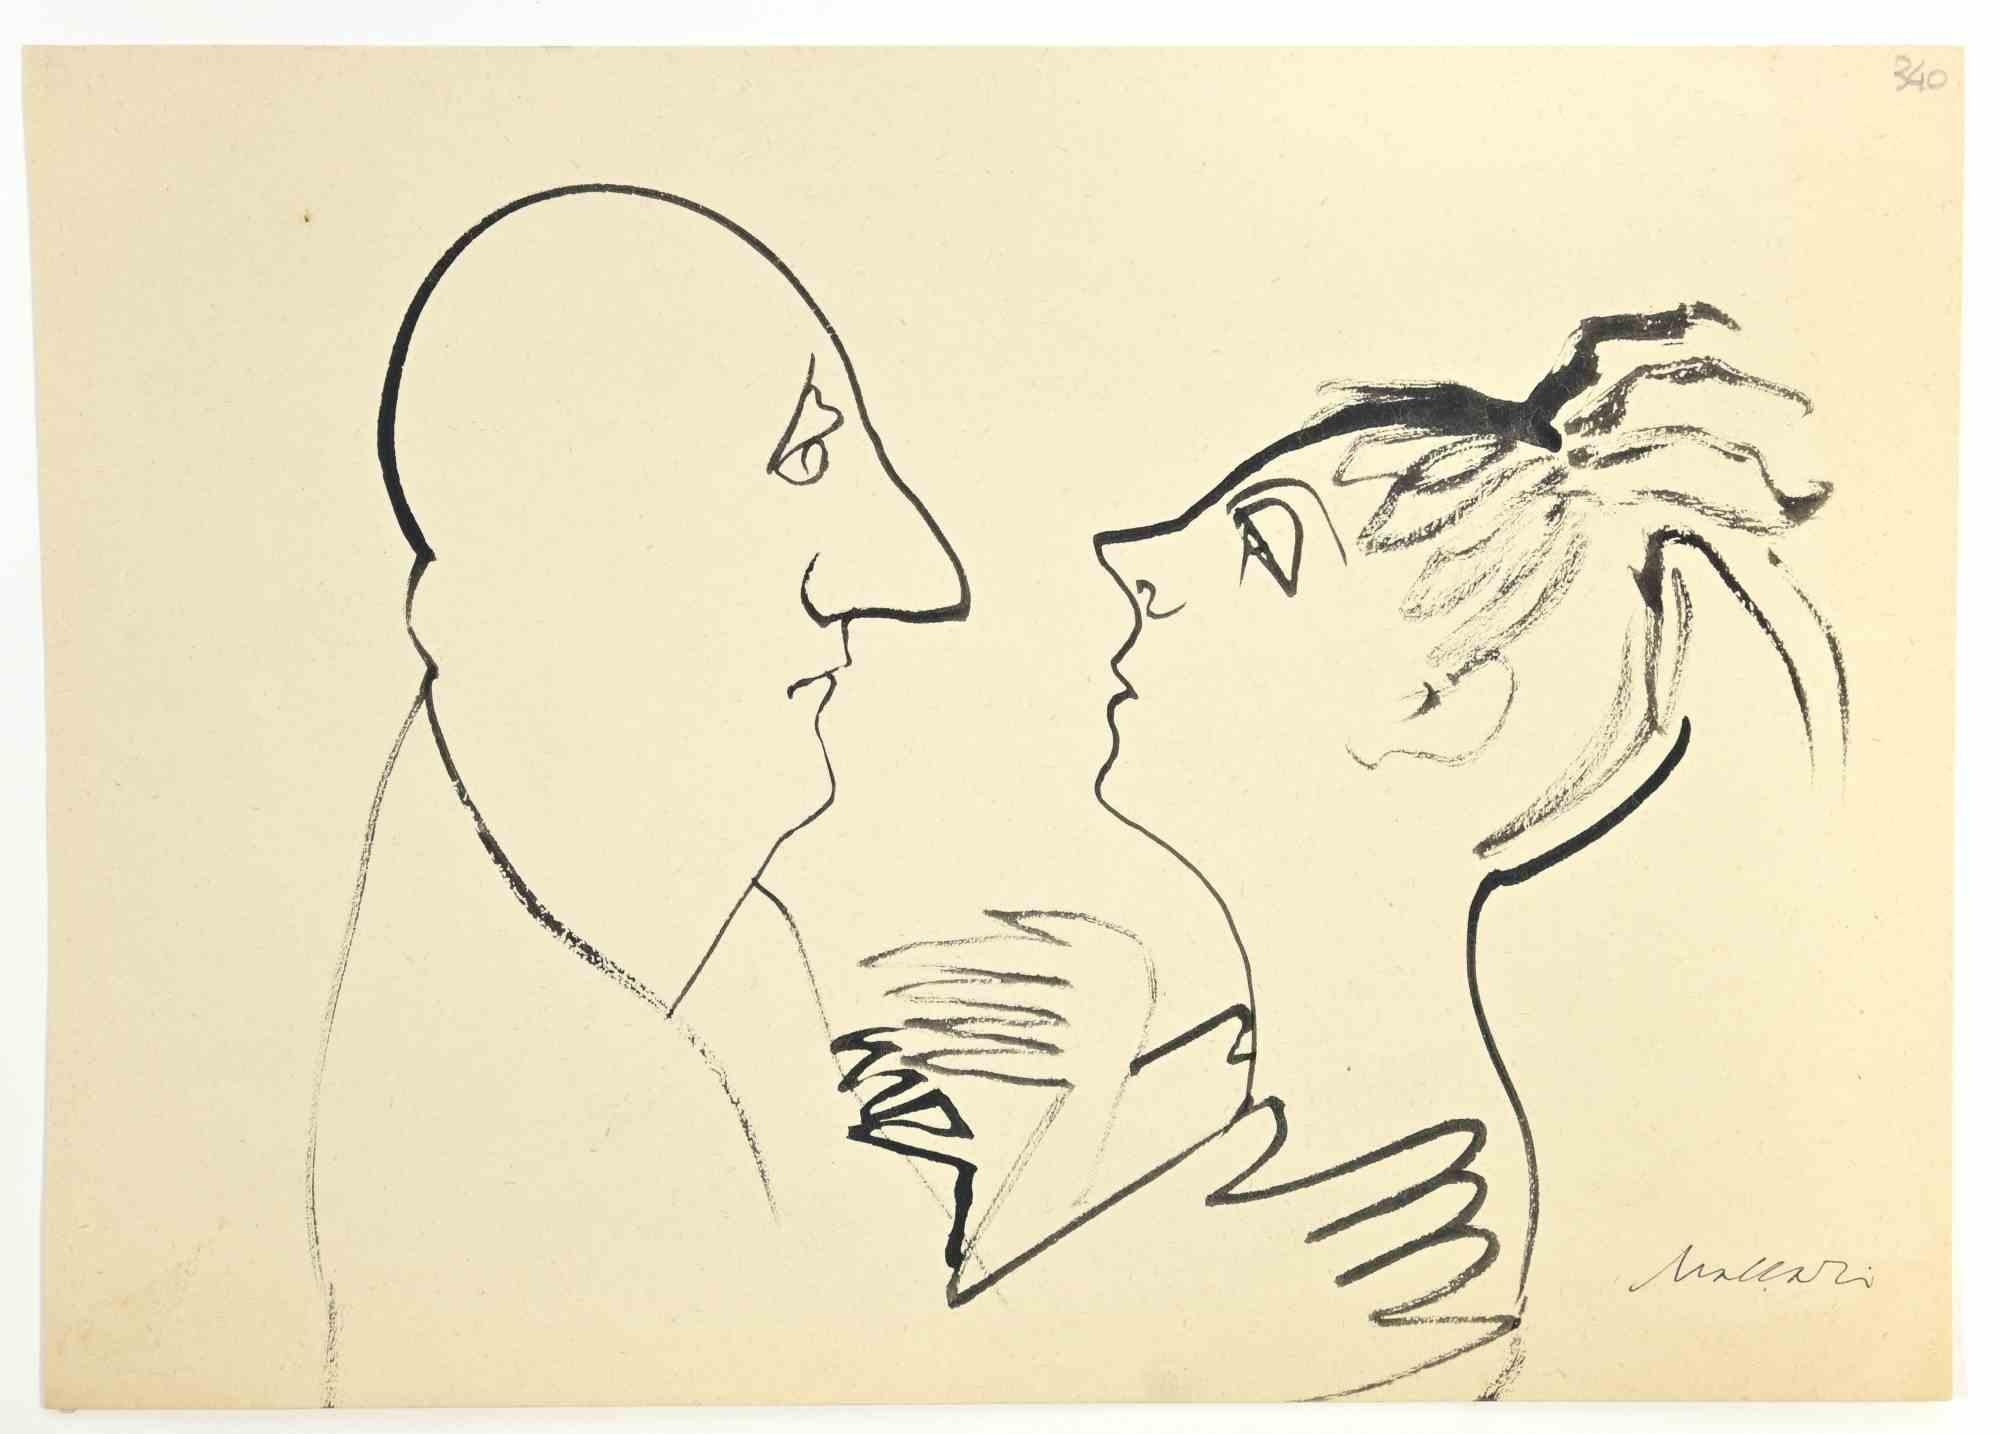 Lovers is a china ink Drawing realized by Mino Maccari  (1924-1989) in the 1960s.

Hand-signed on the lower.

Good conditions.

Mino Maccari (Siena, 1924-Rome, June 16, 1989) was an Italian writer, painter, engraver and journalist, winner of the